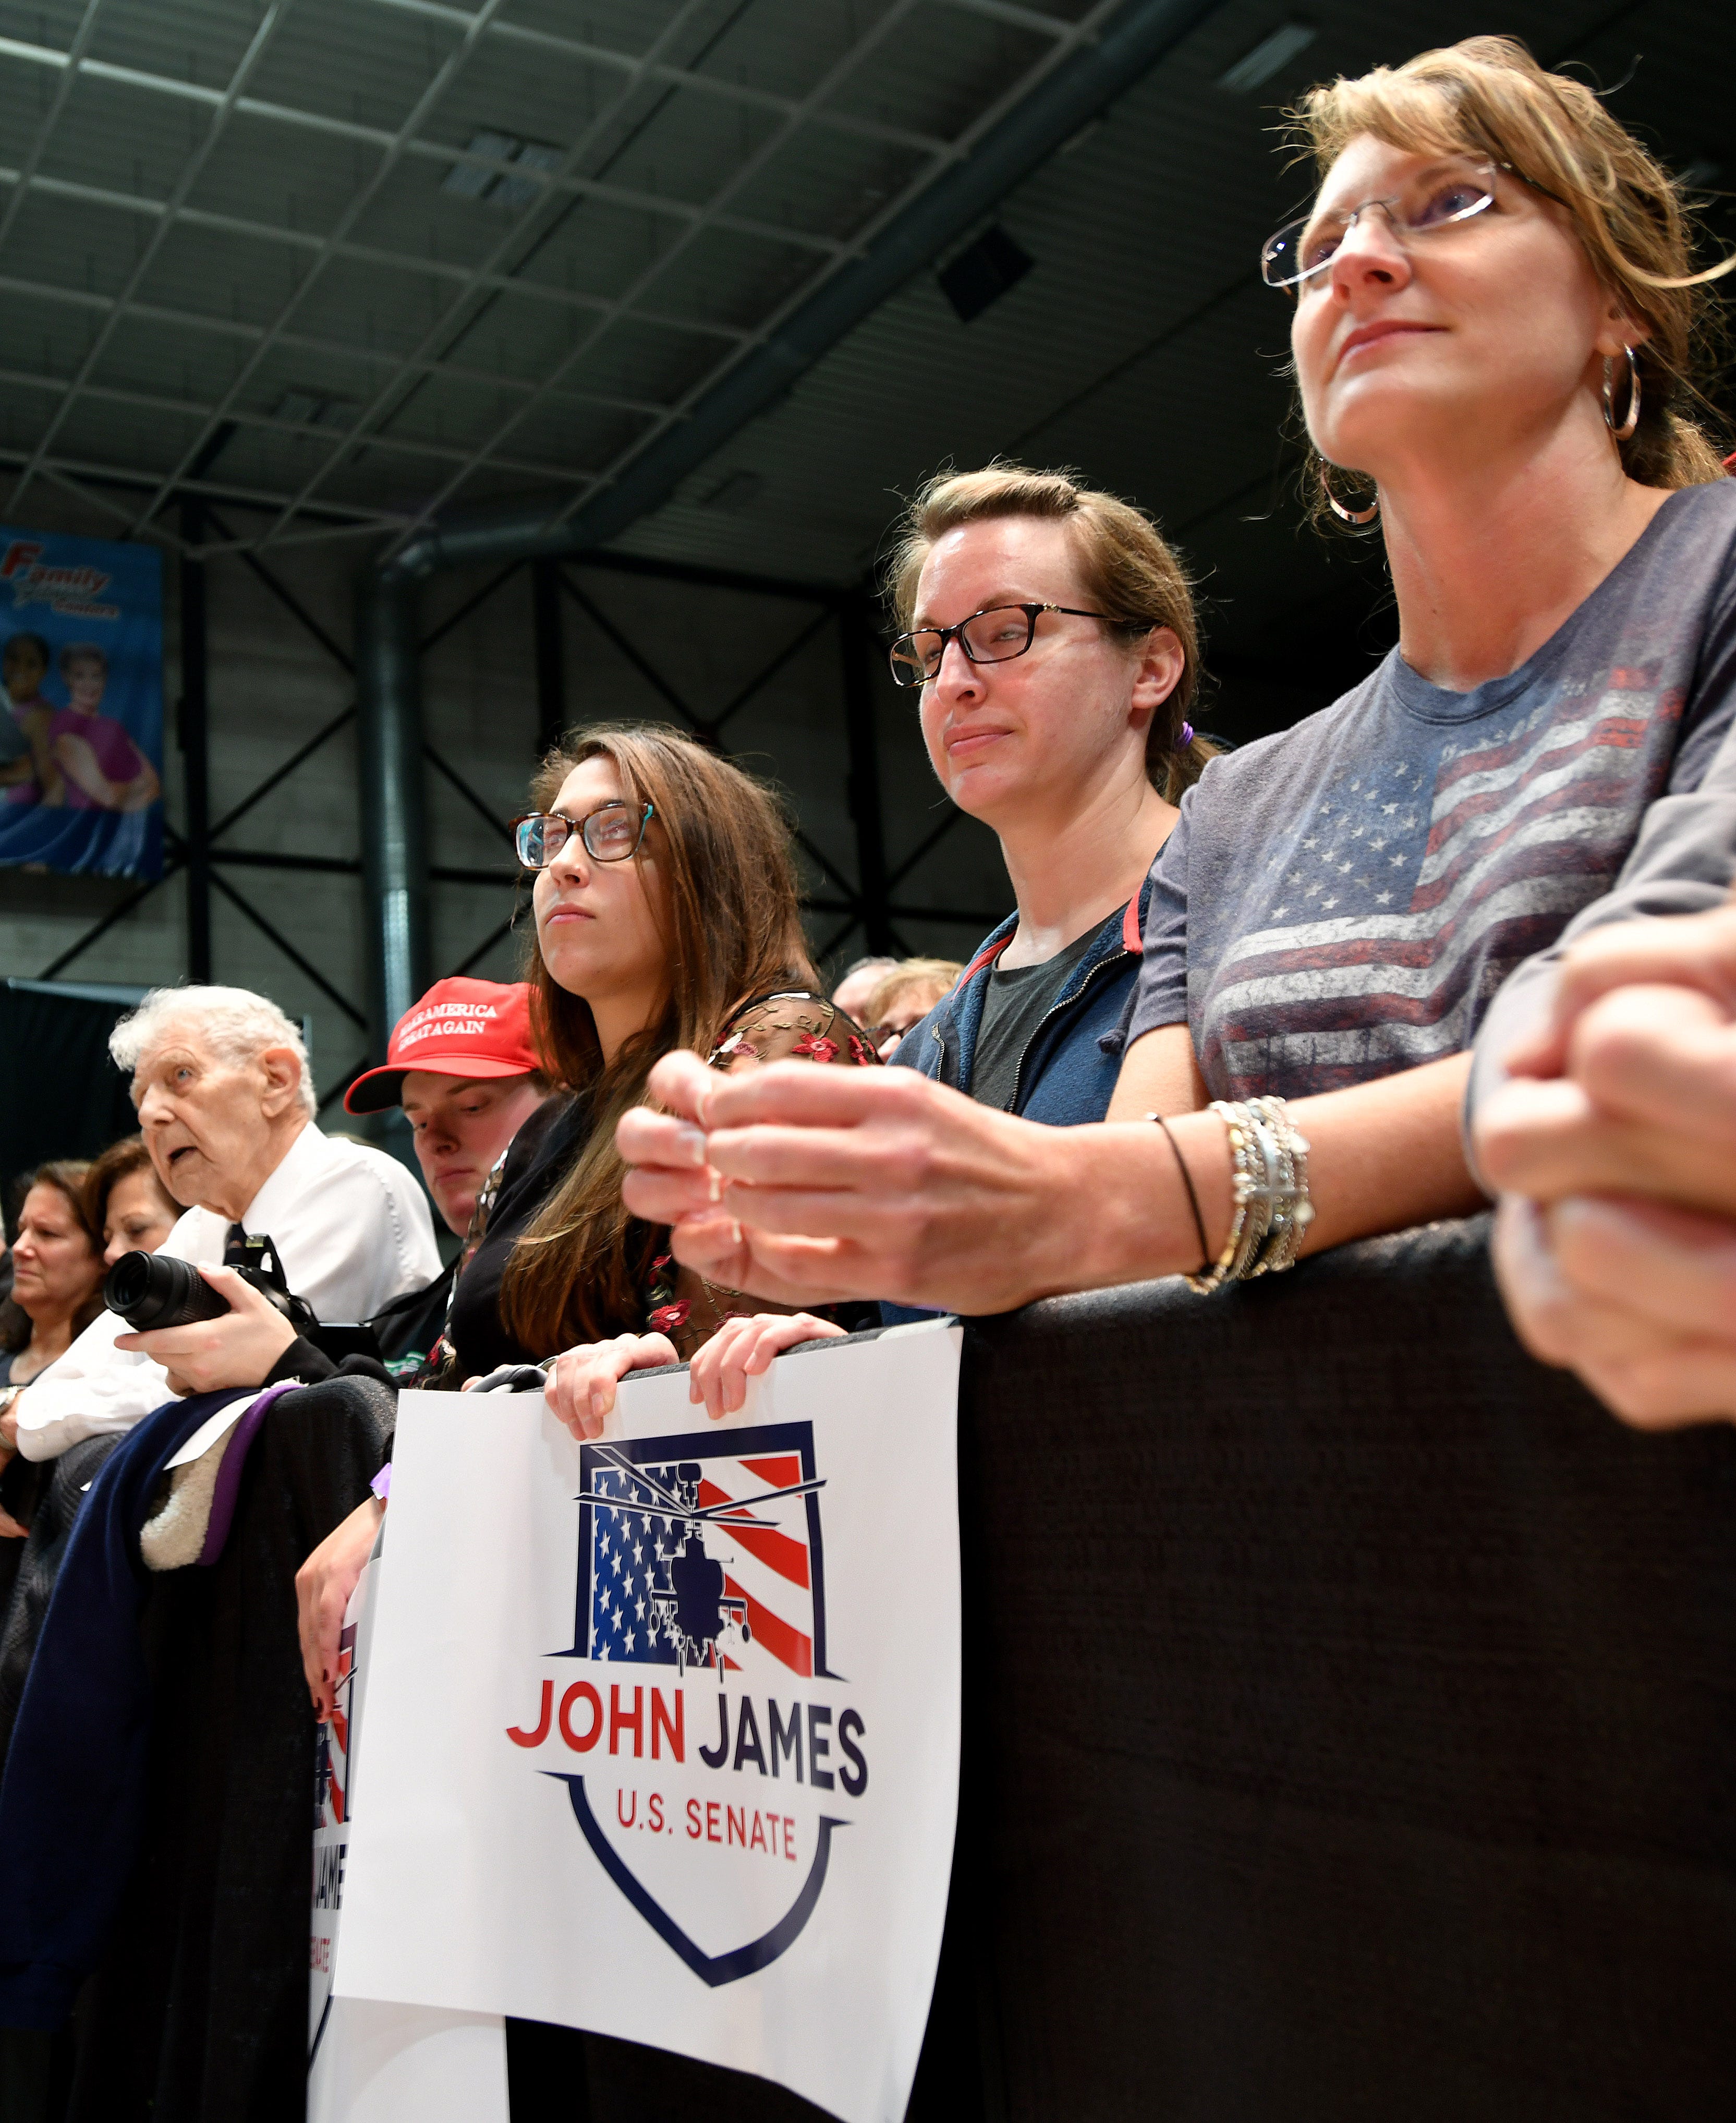 John James supporters line the rail as Vice President Mike Pence campaigns.